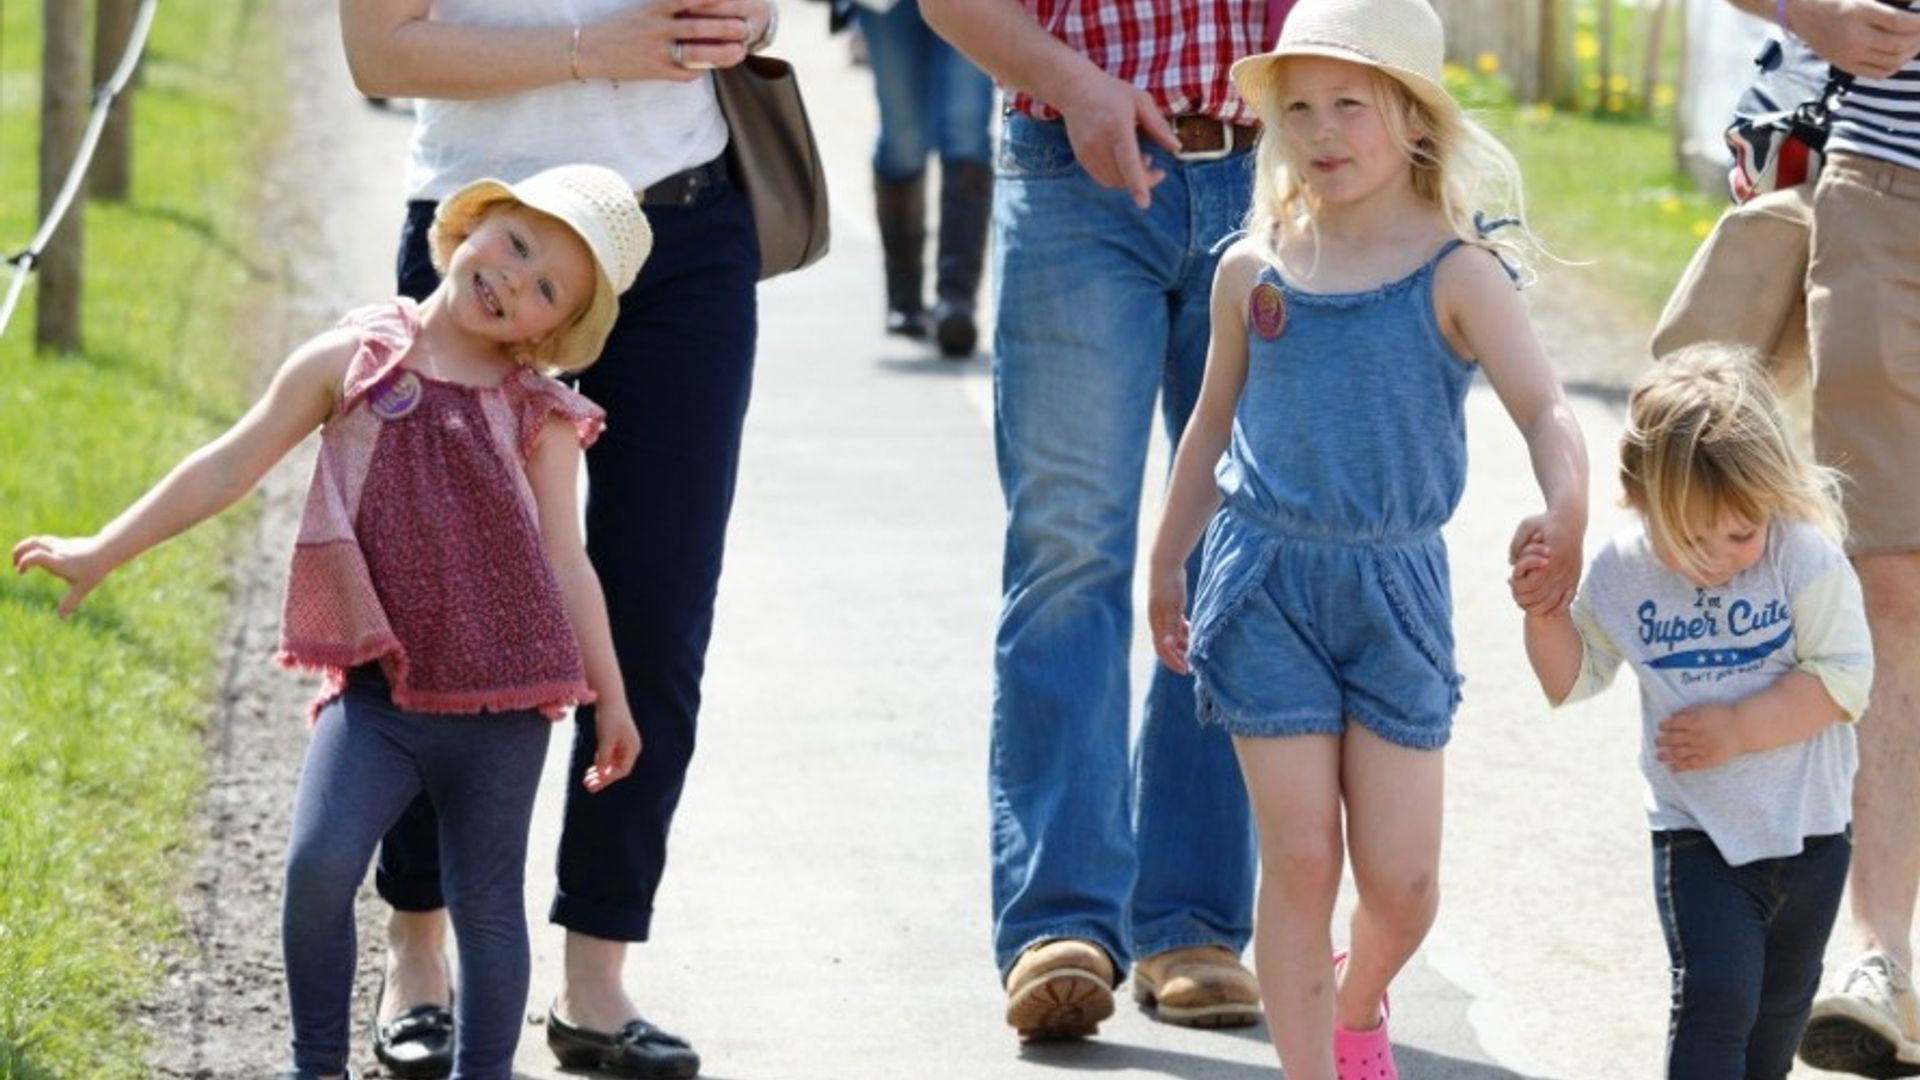 Queen Elizabeth's great-granddaughters dress down for a play date